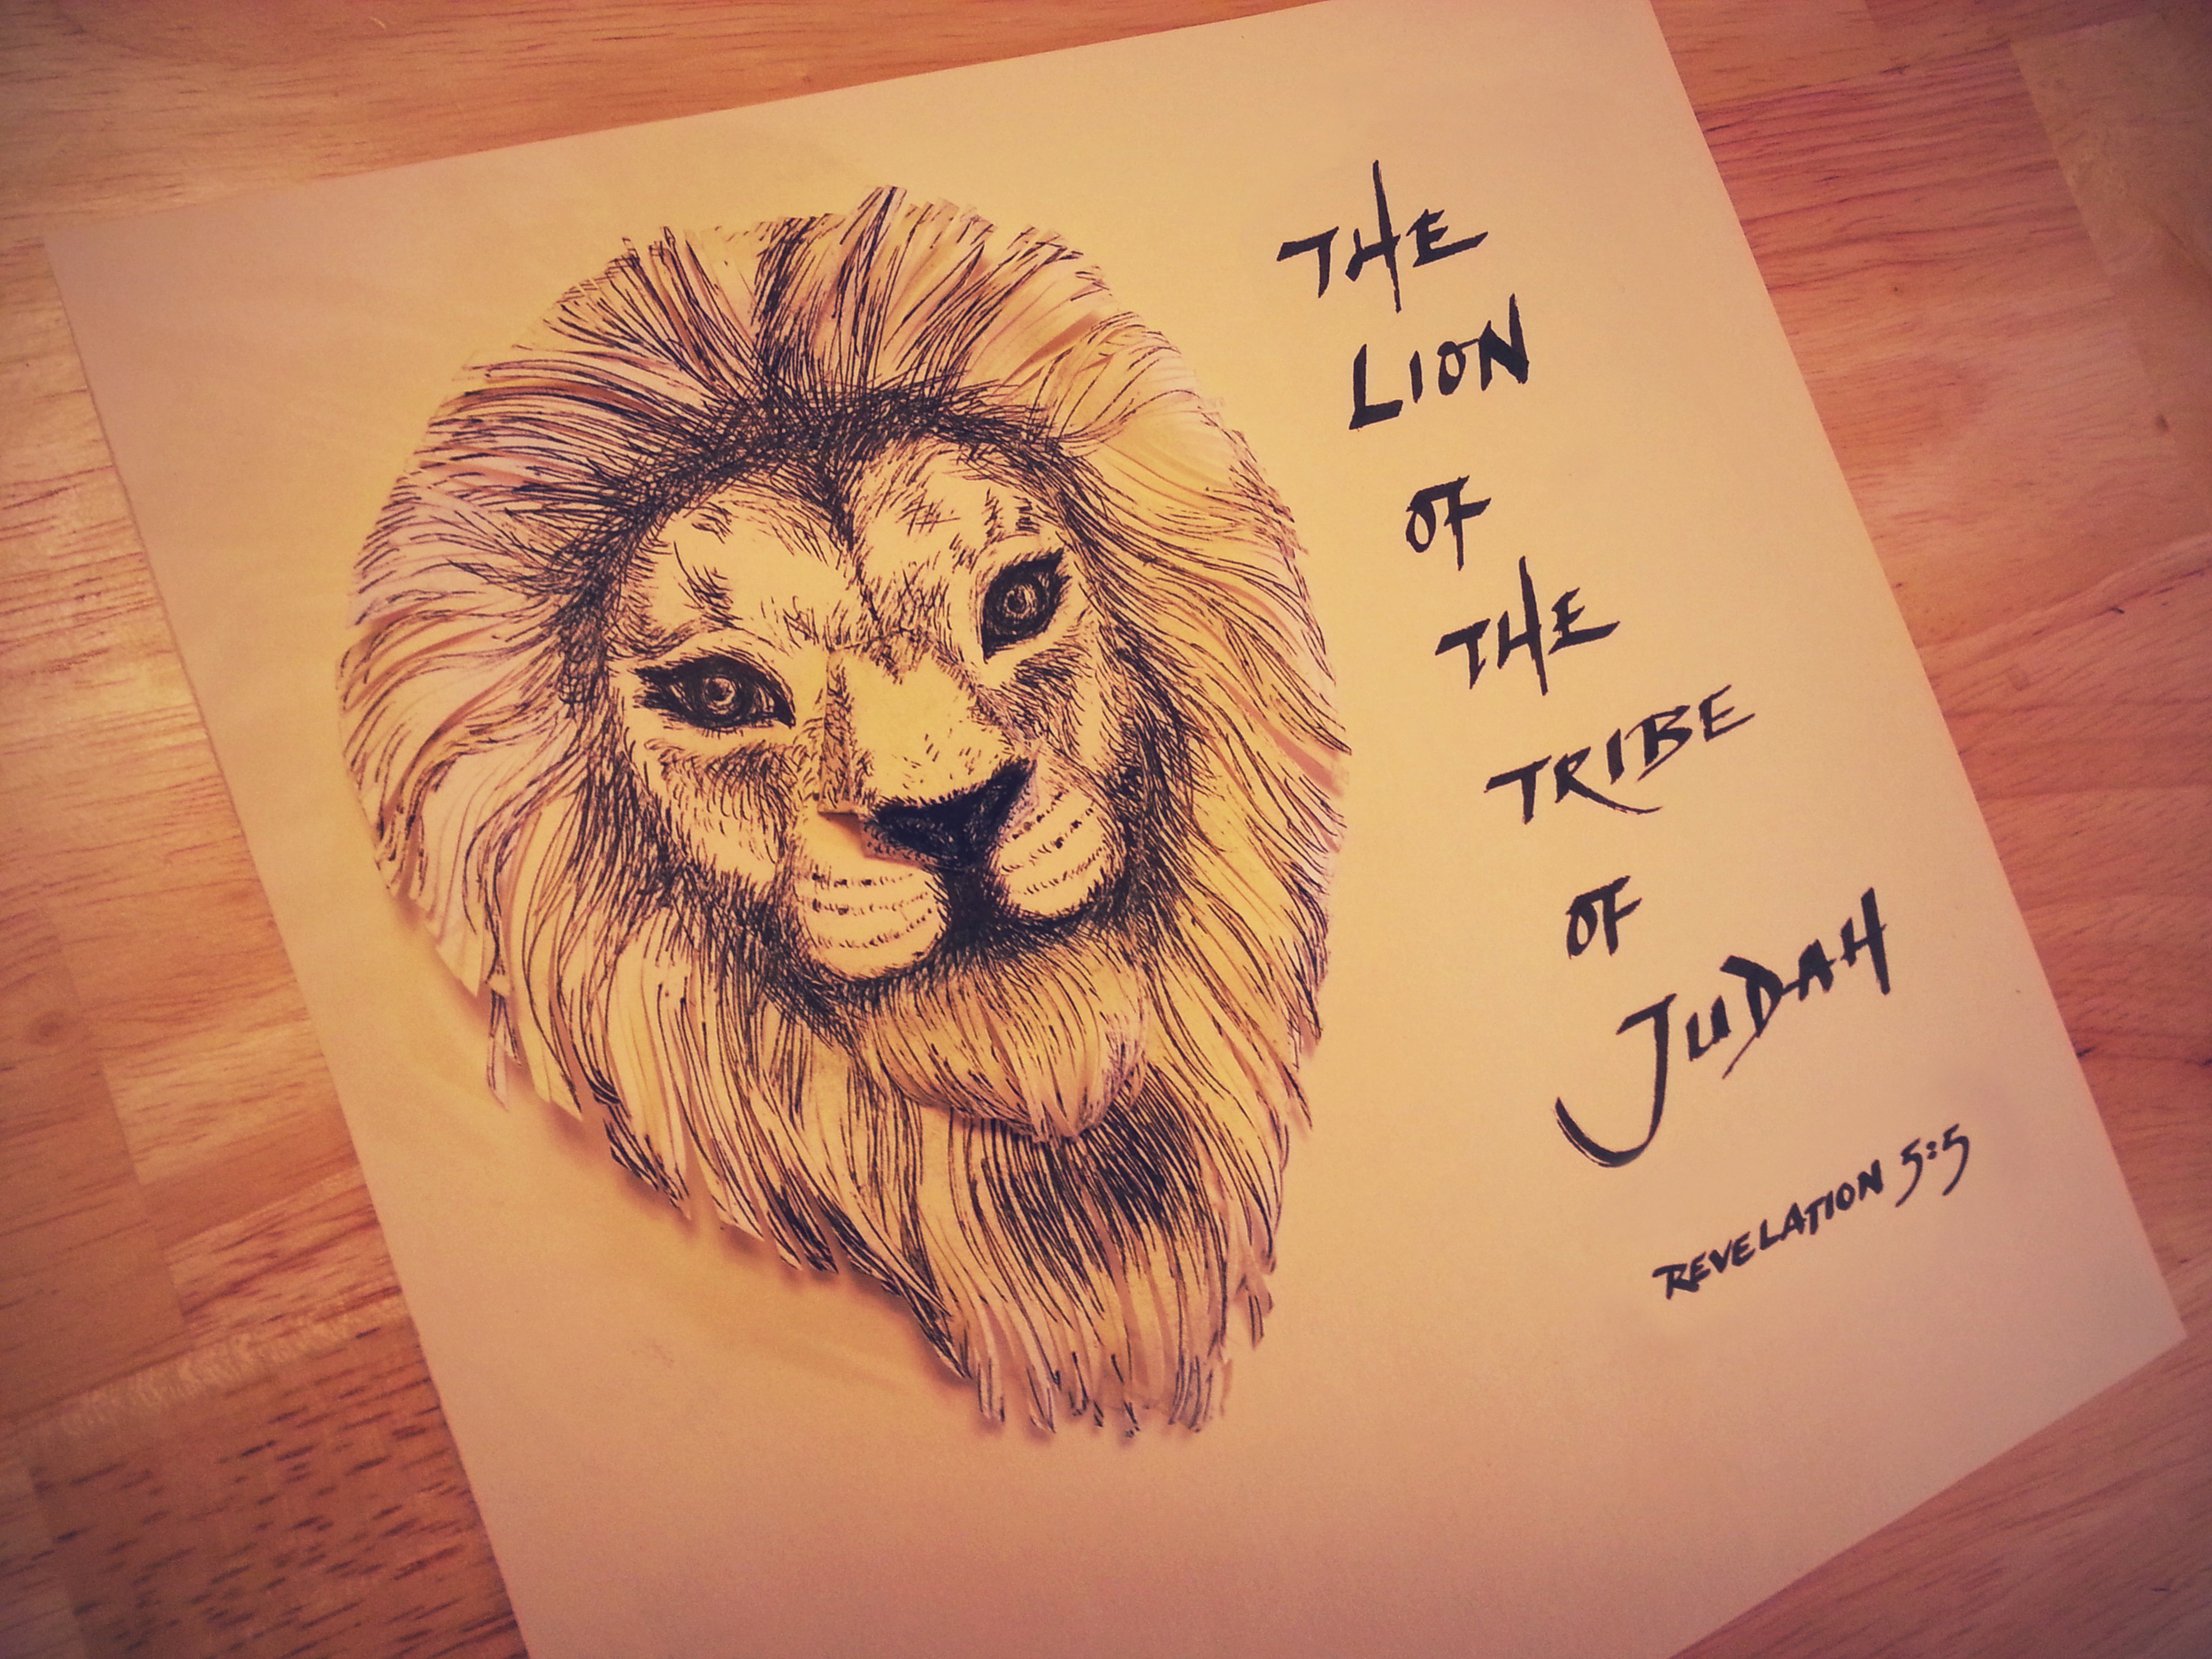  He is the Lion of the Tribe of Judah. 